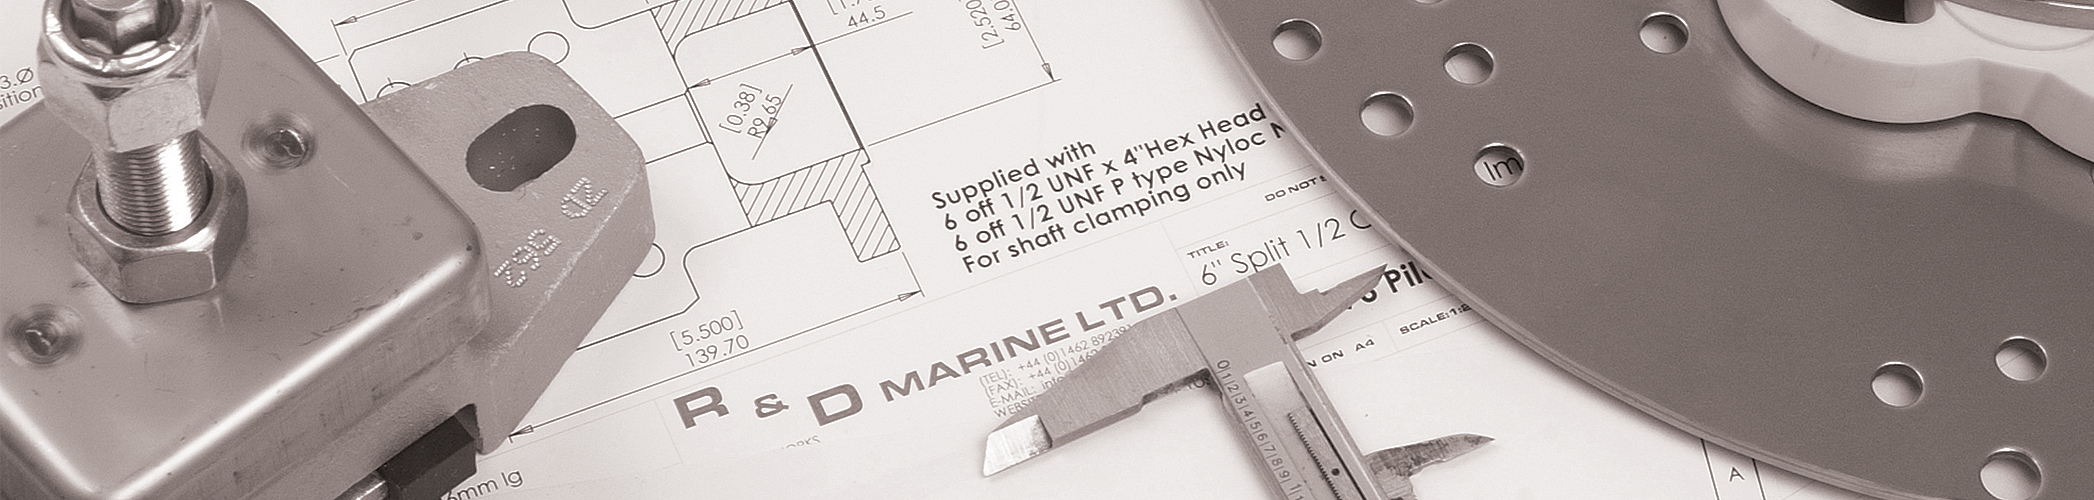 R&D Marine product banner